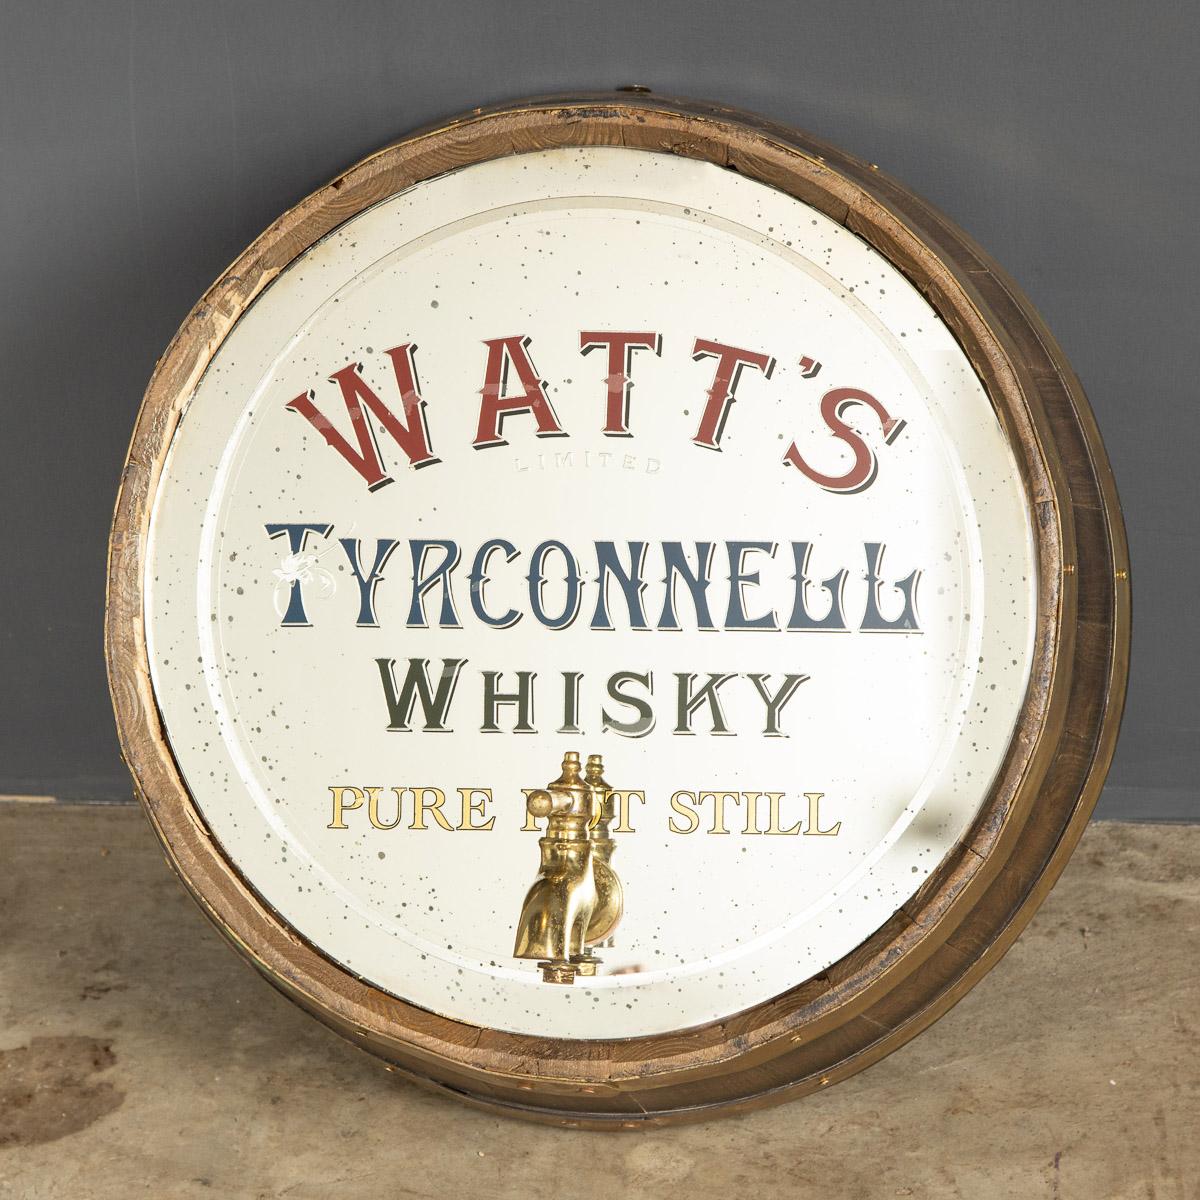 Antique 20th century rare advertising mirror. This Watts Irish Whisky mirror has been framed in a slice of an oak barrel with a decorative brass tap at the bottom. The Watts Distillery was founded by The Watt family in 1762 the Tyrconnell Whisky was